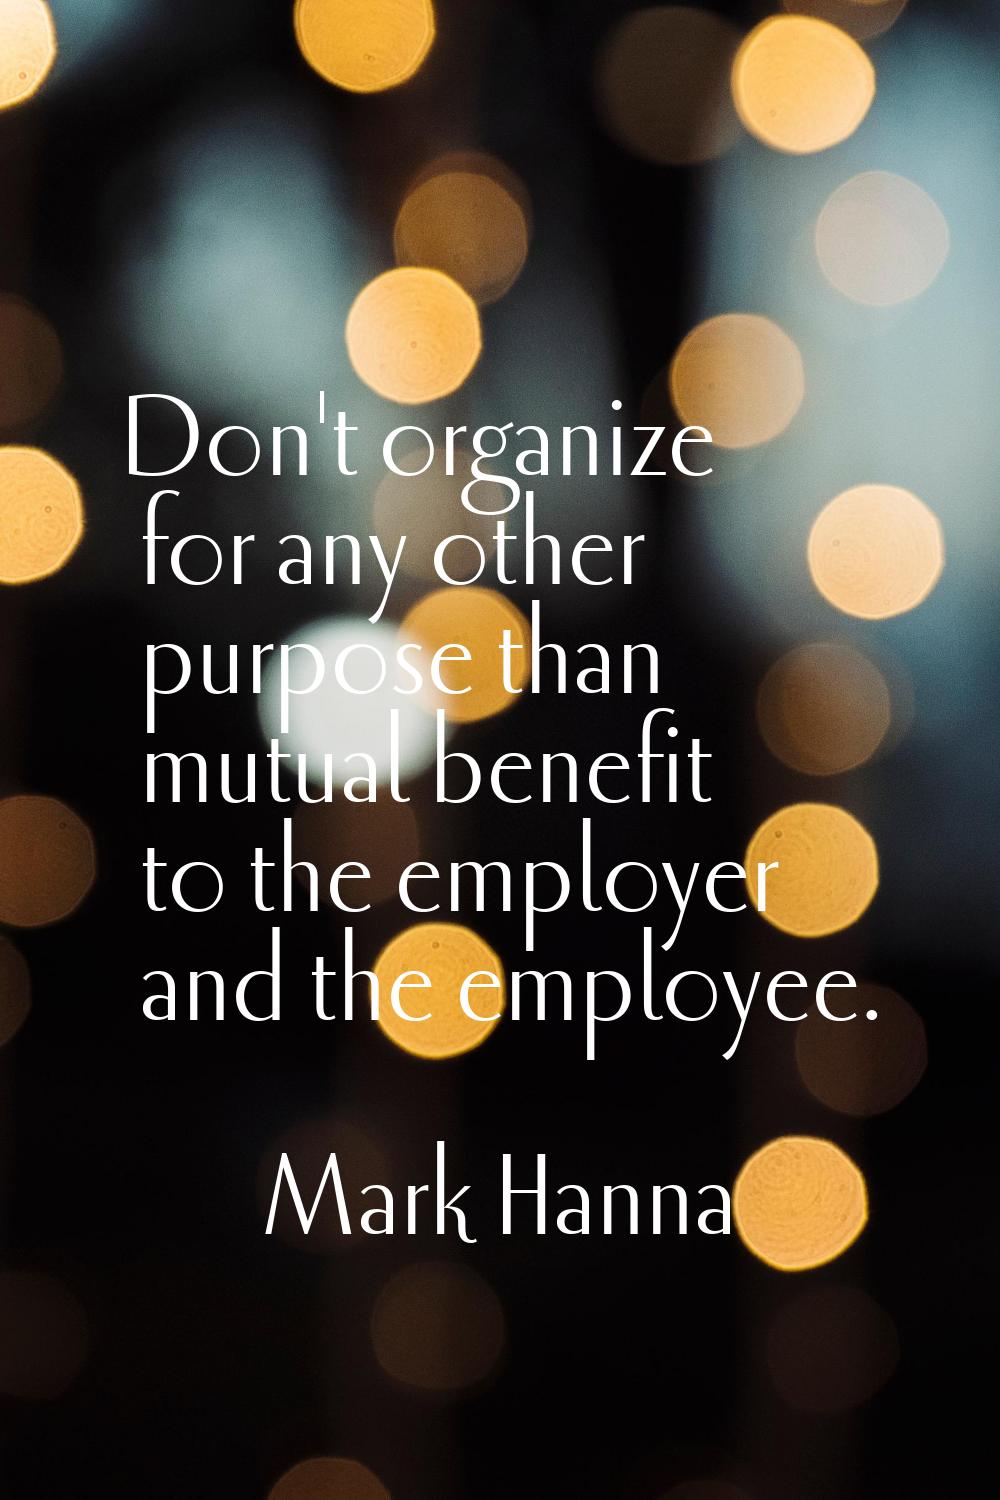 Don't organize for any other purpose than mutual benefit to the employer and the employee.